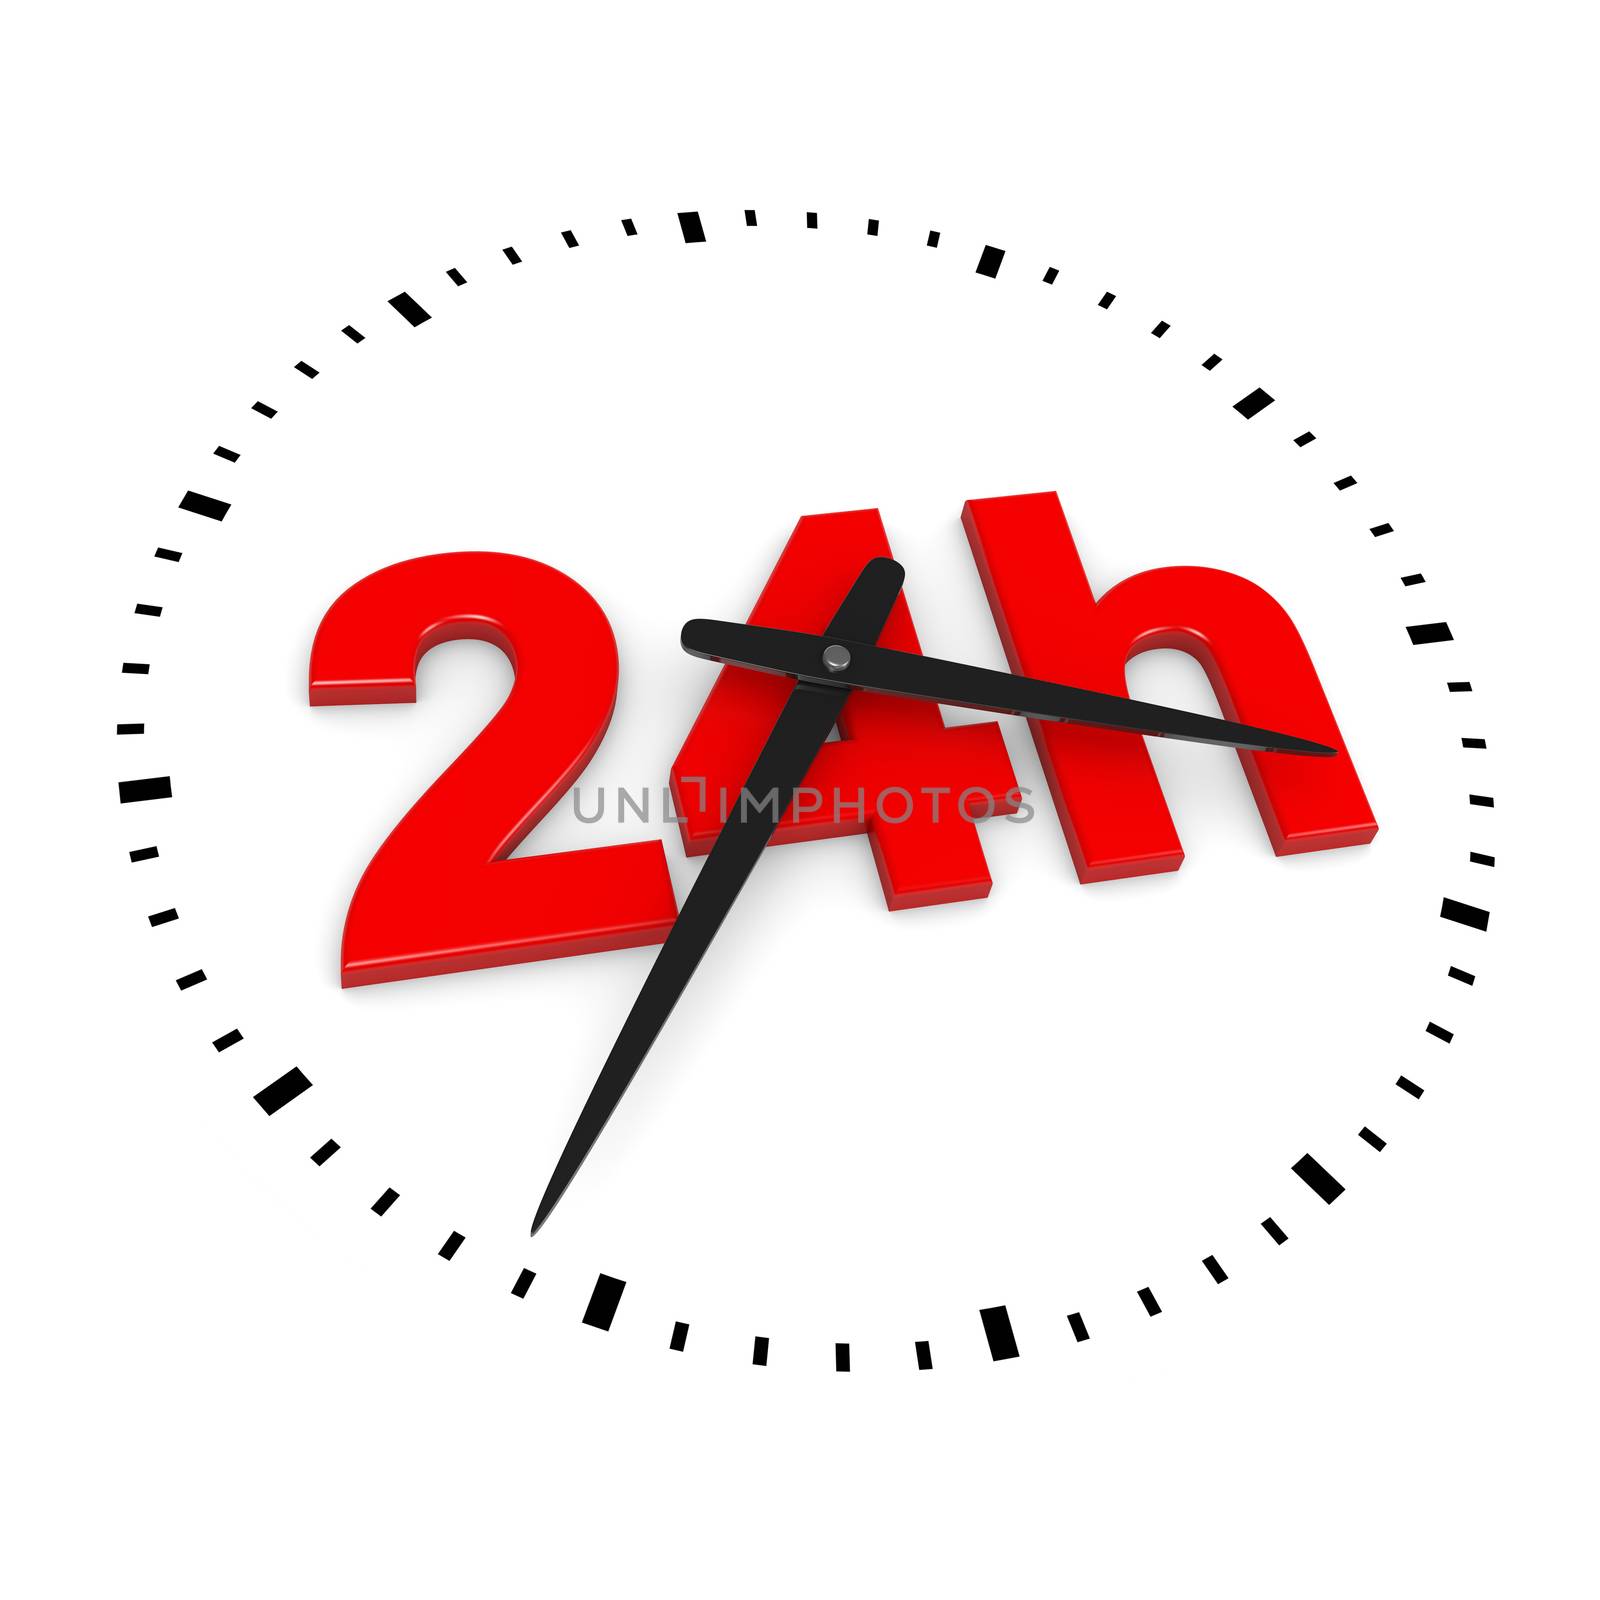 24h Service Red Text inside Round Wall Clocks on White Background 3D Illustration